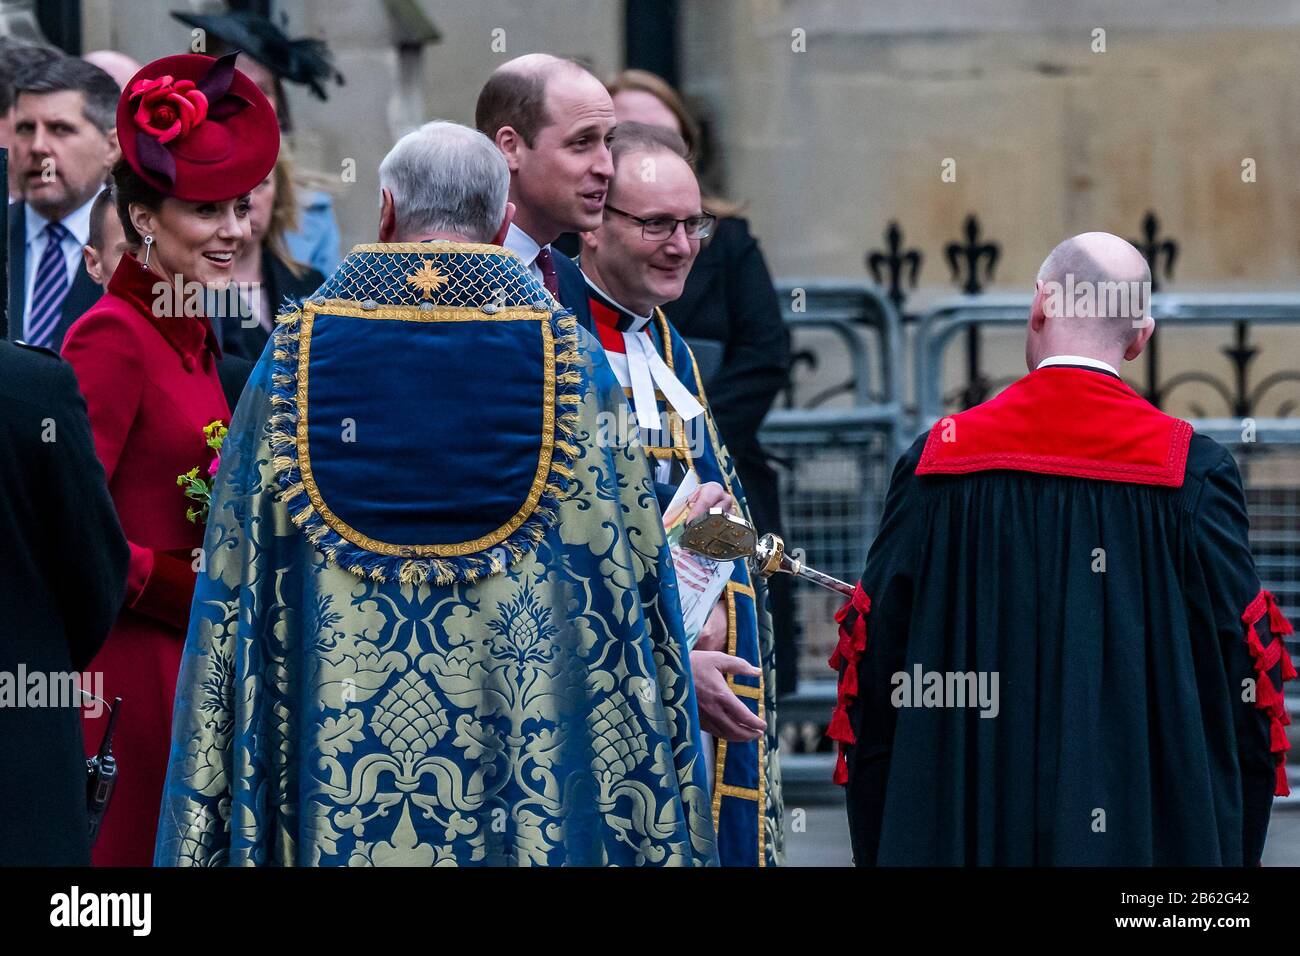 Westminster Abbey, London, UK. 09th Mar, 2020. Prince William and Kate, the Duke and Duchess of Cambridge, leave - A service to commemorate the Commonwealth is attended by the Royal Family and representatives of Commonwealth countries, at Wrestminster Abbey, London. Credit: Guy Bell/Alamy Live News Credit: Guy Bell/Alamy Live News Stock Photo